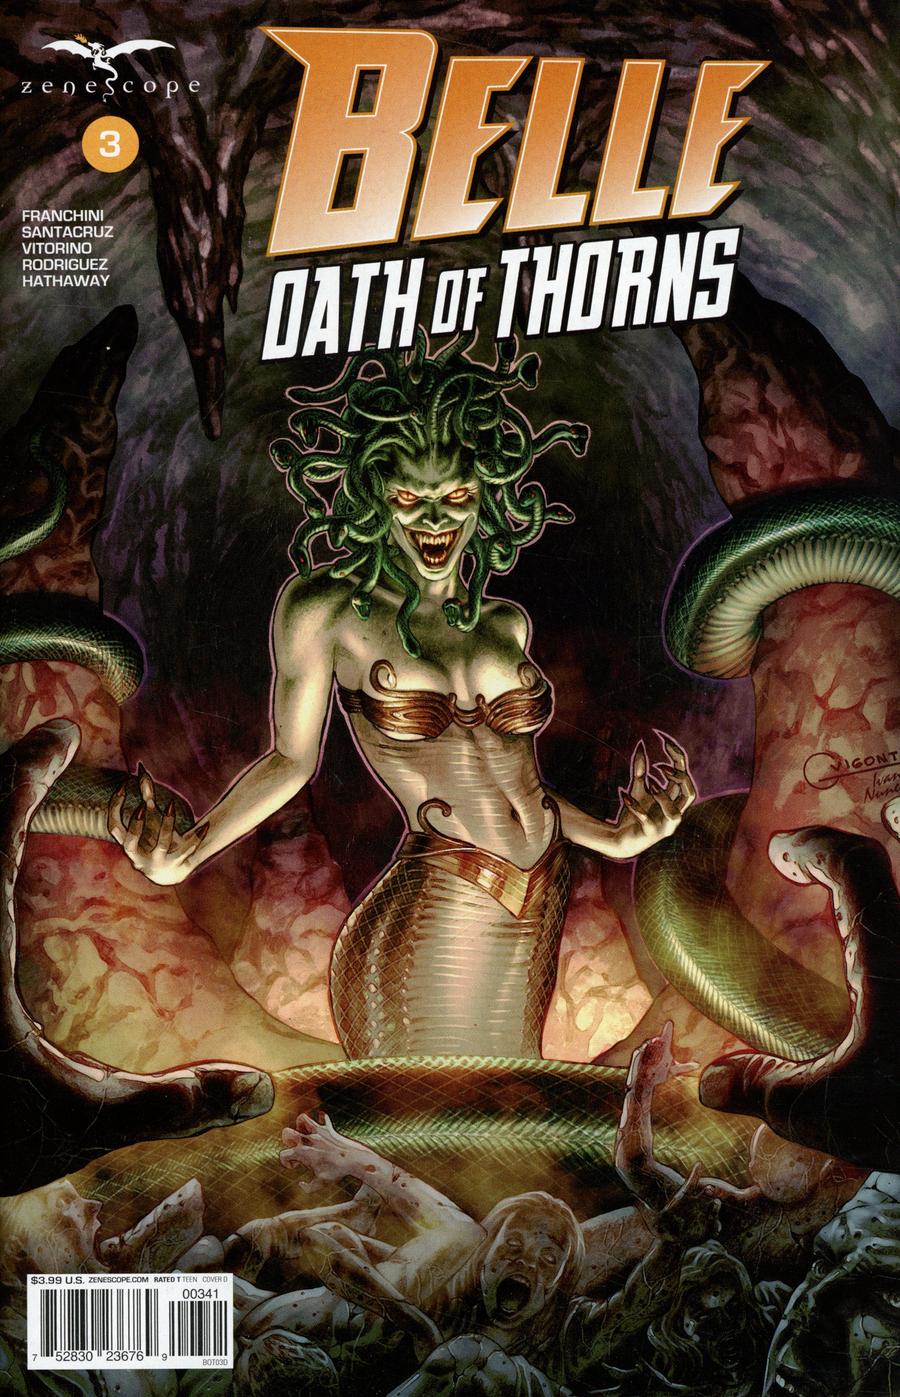 Grimm Fairy Tales Presents Belle Oath Of Thorns #3 Cover D Geebo Vigonte